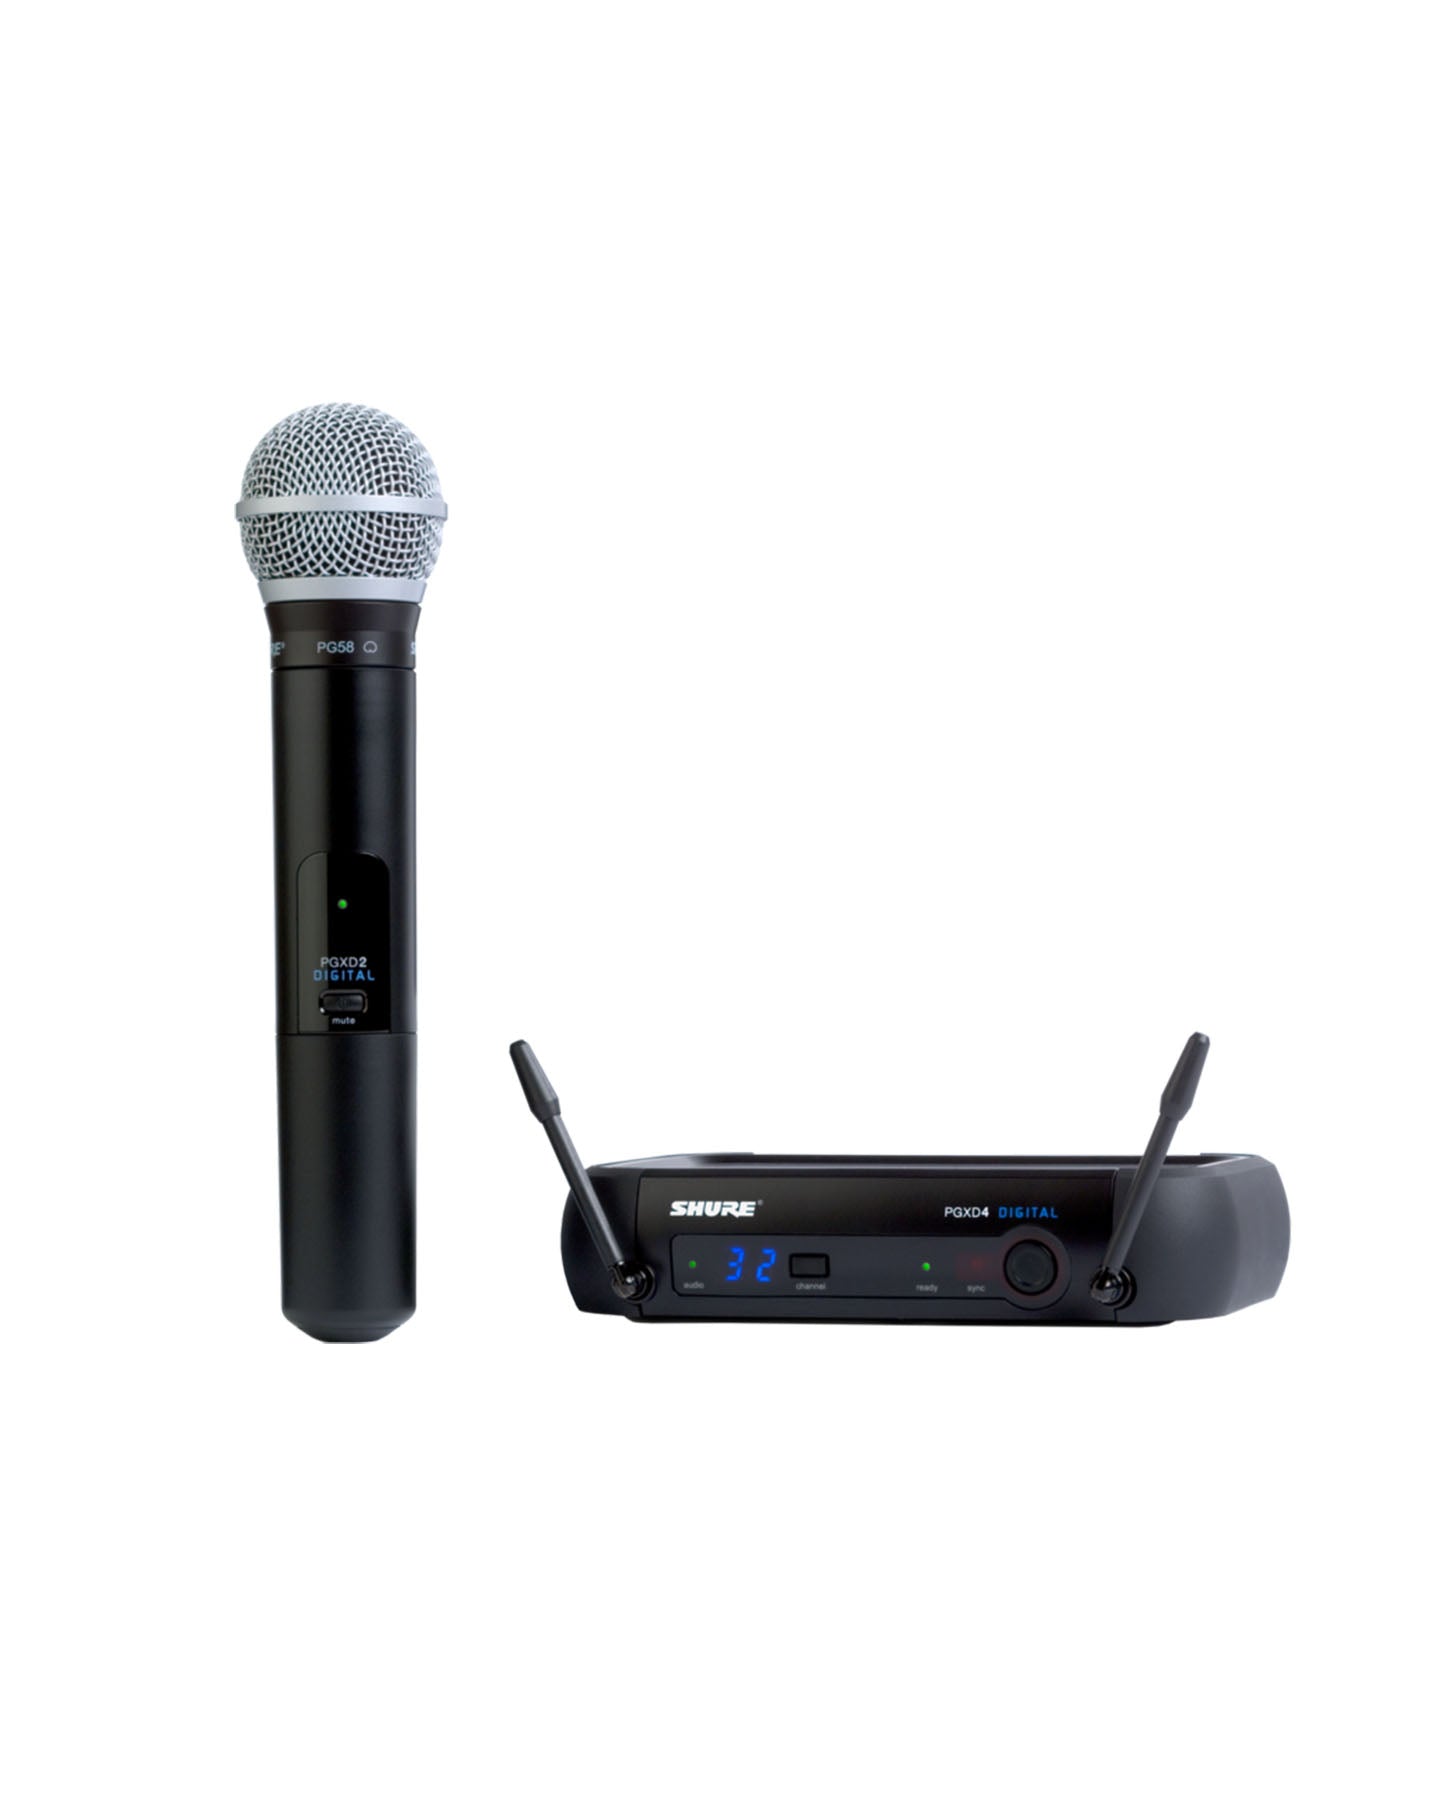 Digital Wireless Handheld Microphone System with PG58